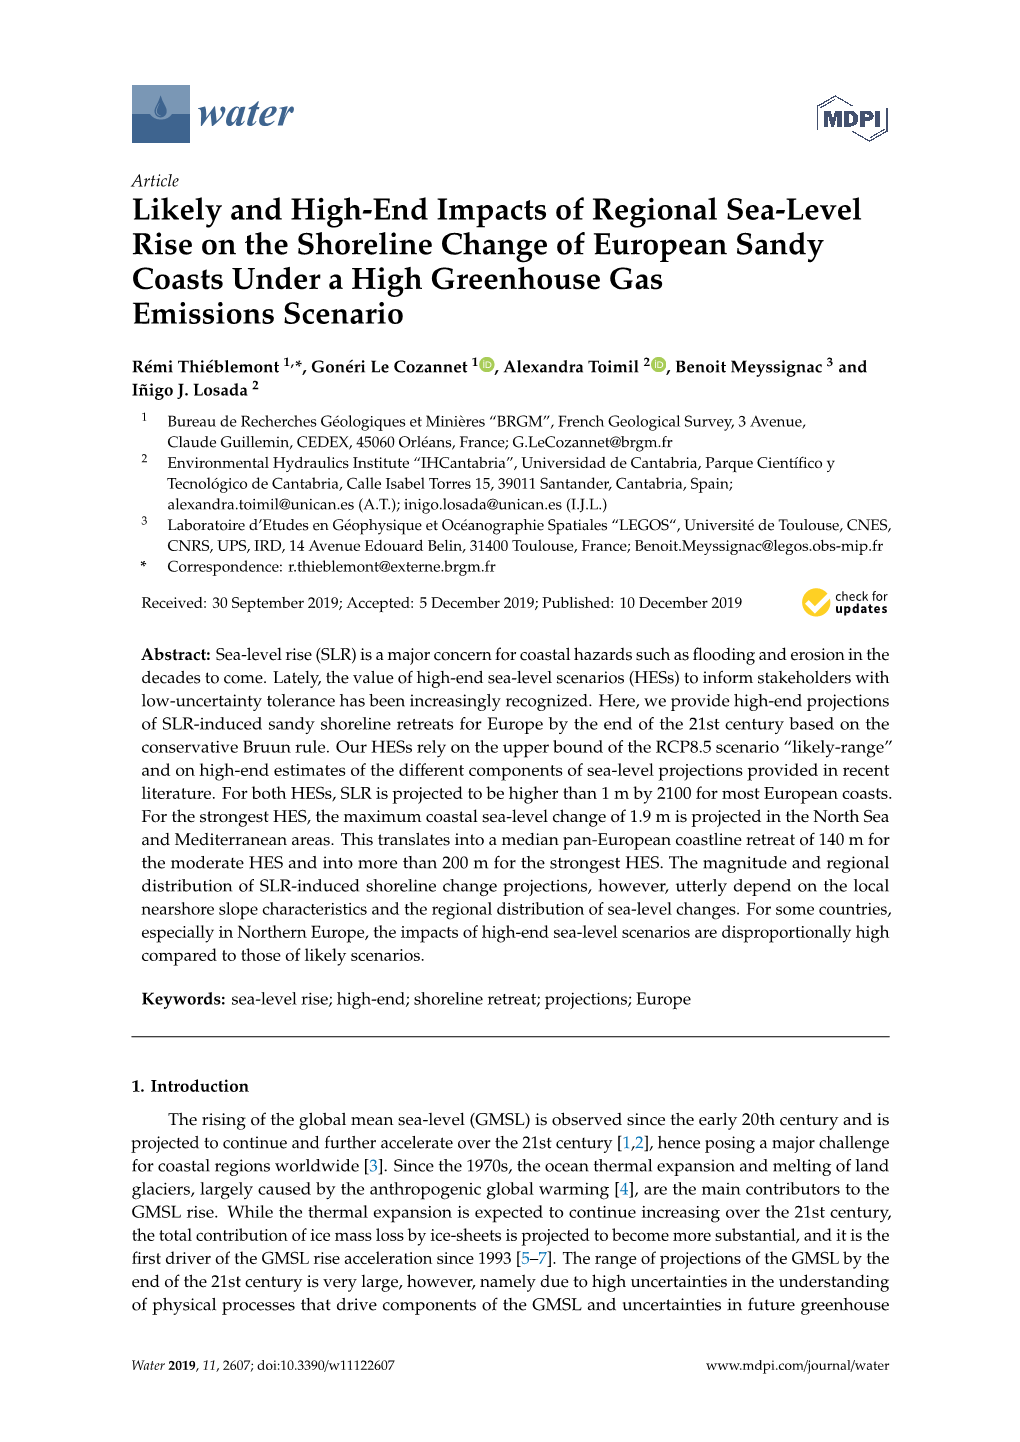 Likely and High-End Impacts of Regional Sea-Level Rise on the Shoreline Change of European Sandy Coasts Under a High Greenhouse Gas Emissions Scenario